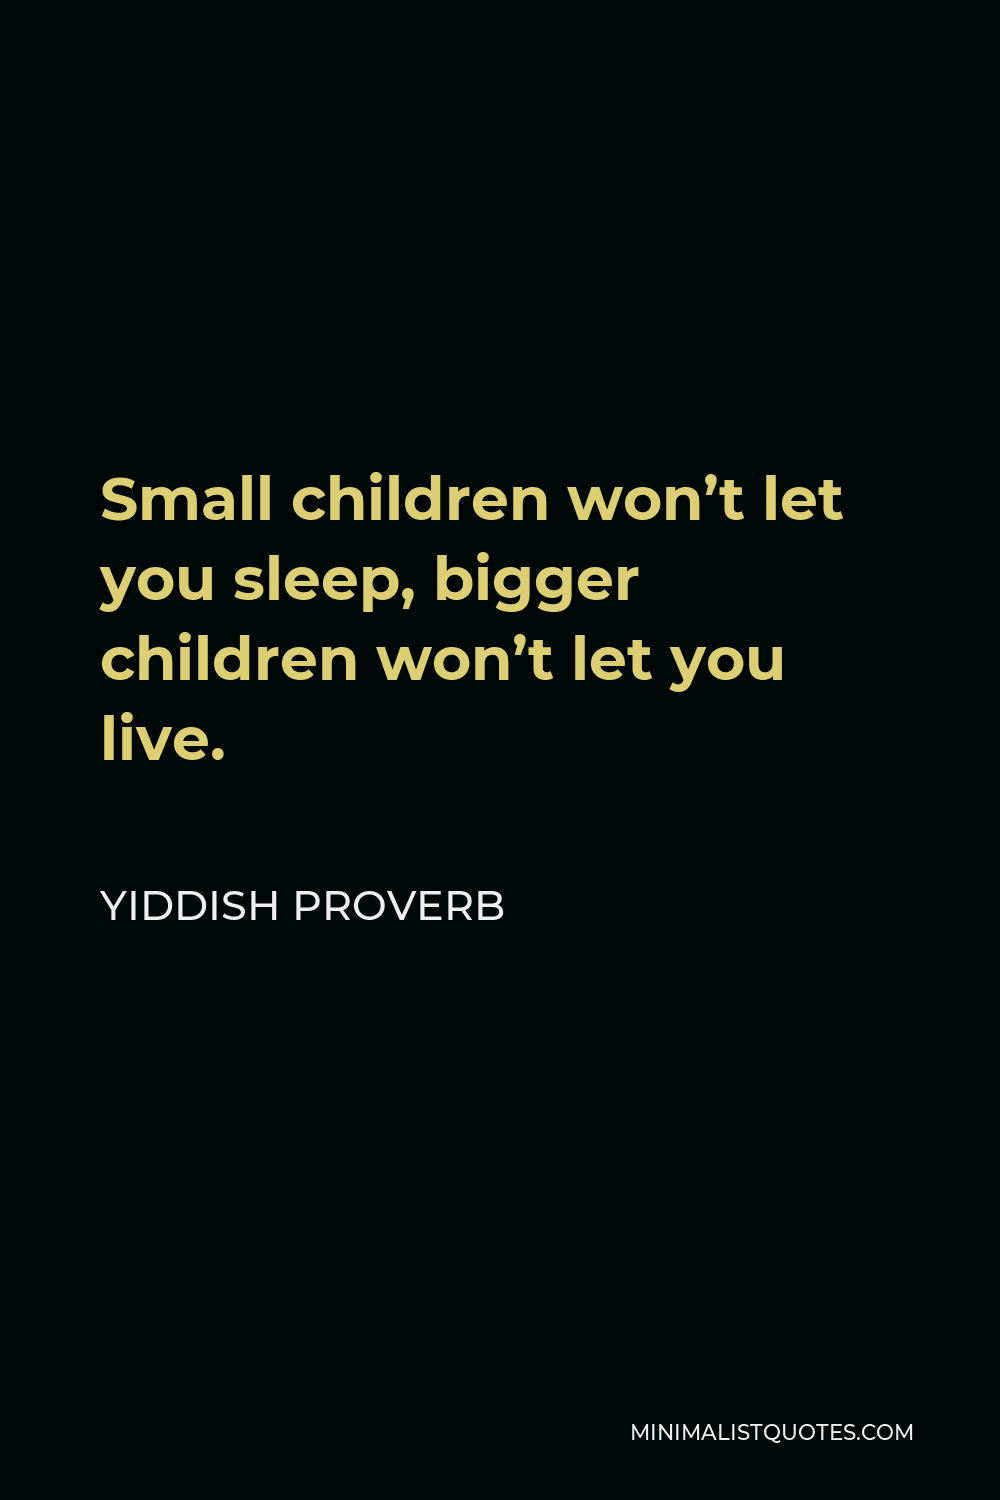 Yiddish Proverb Quote - Small children won’t let you sleep, bigger children won’t let you live.